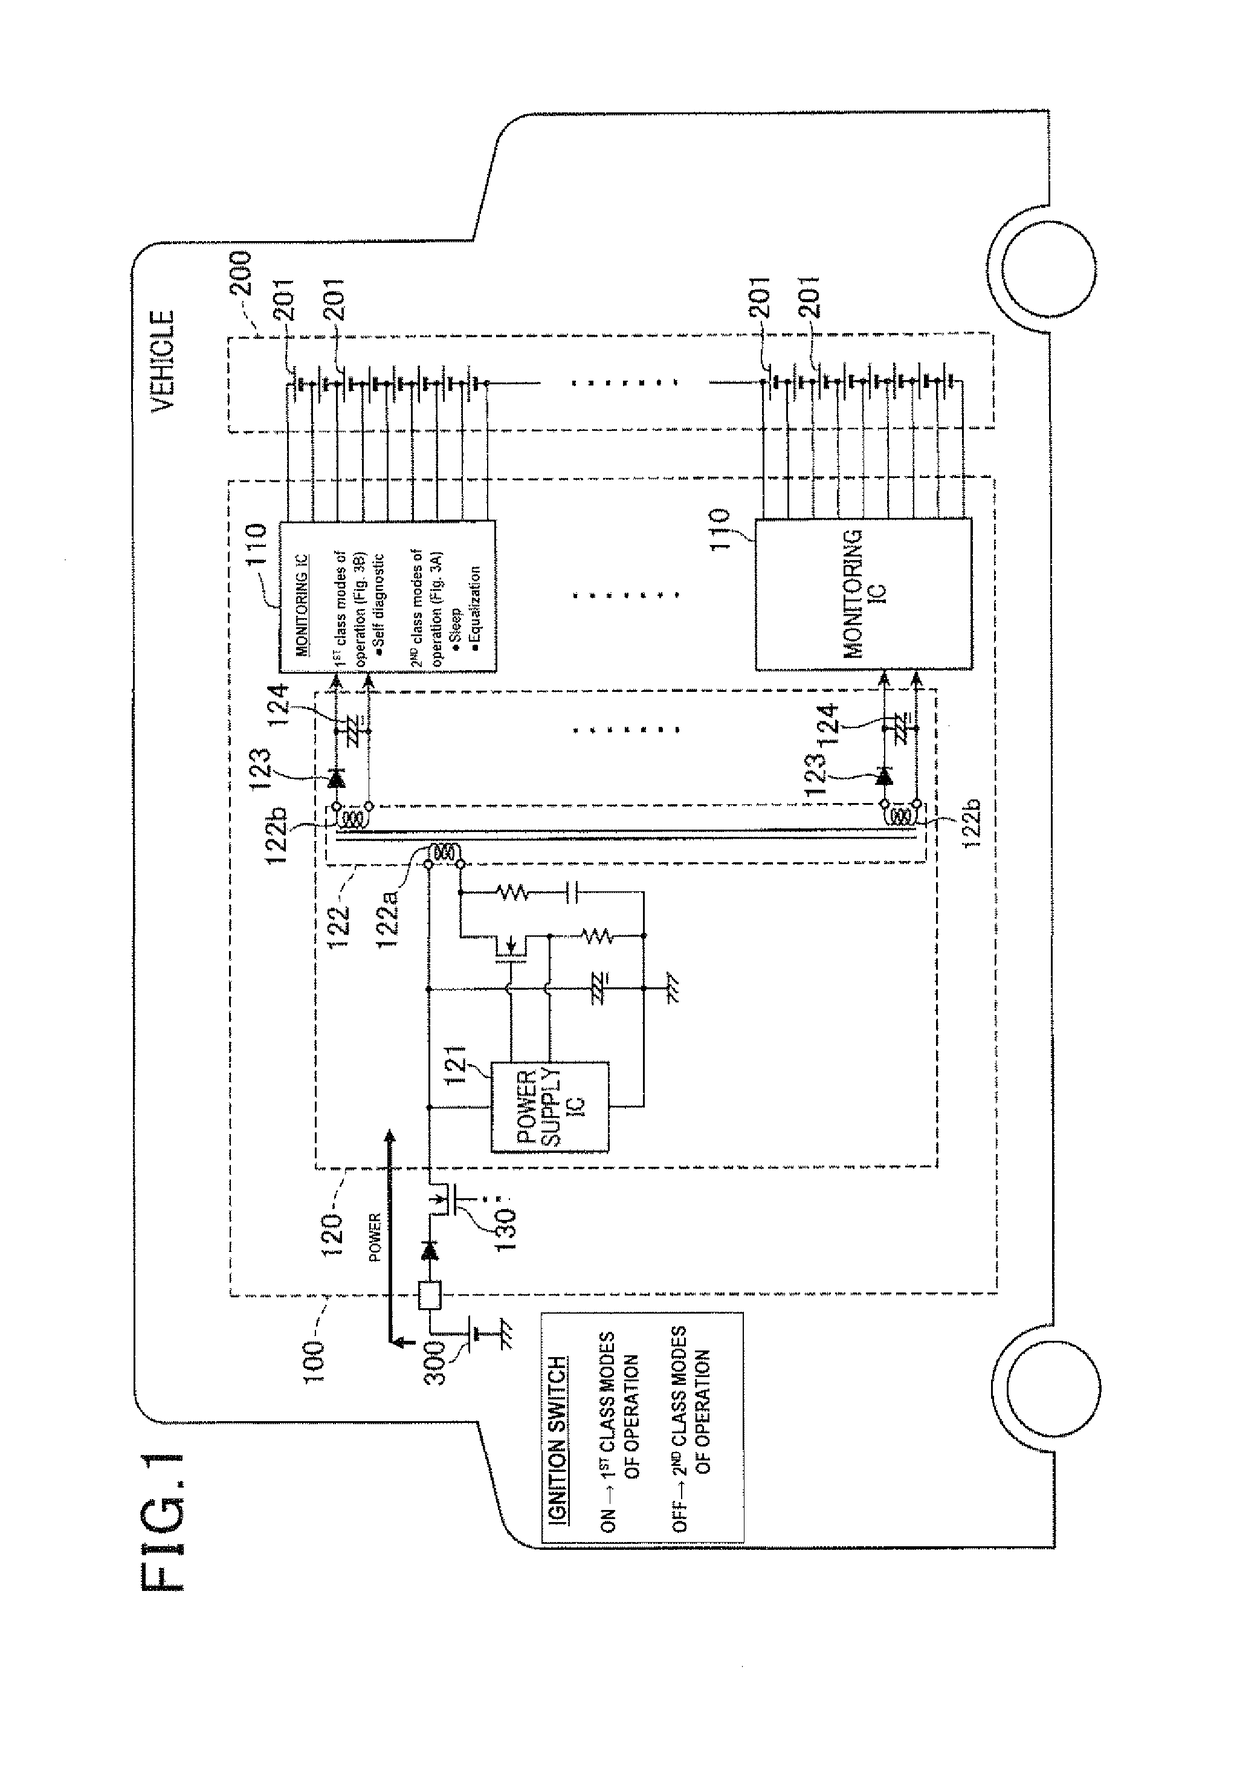 Battery monitoring apparatus with monitoring integrated circuit selectively powered by a high voltage battery or low voltage power supply powered by a low voltage battery